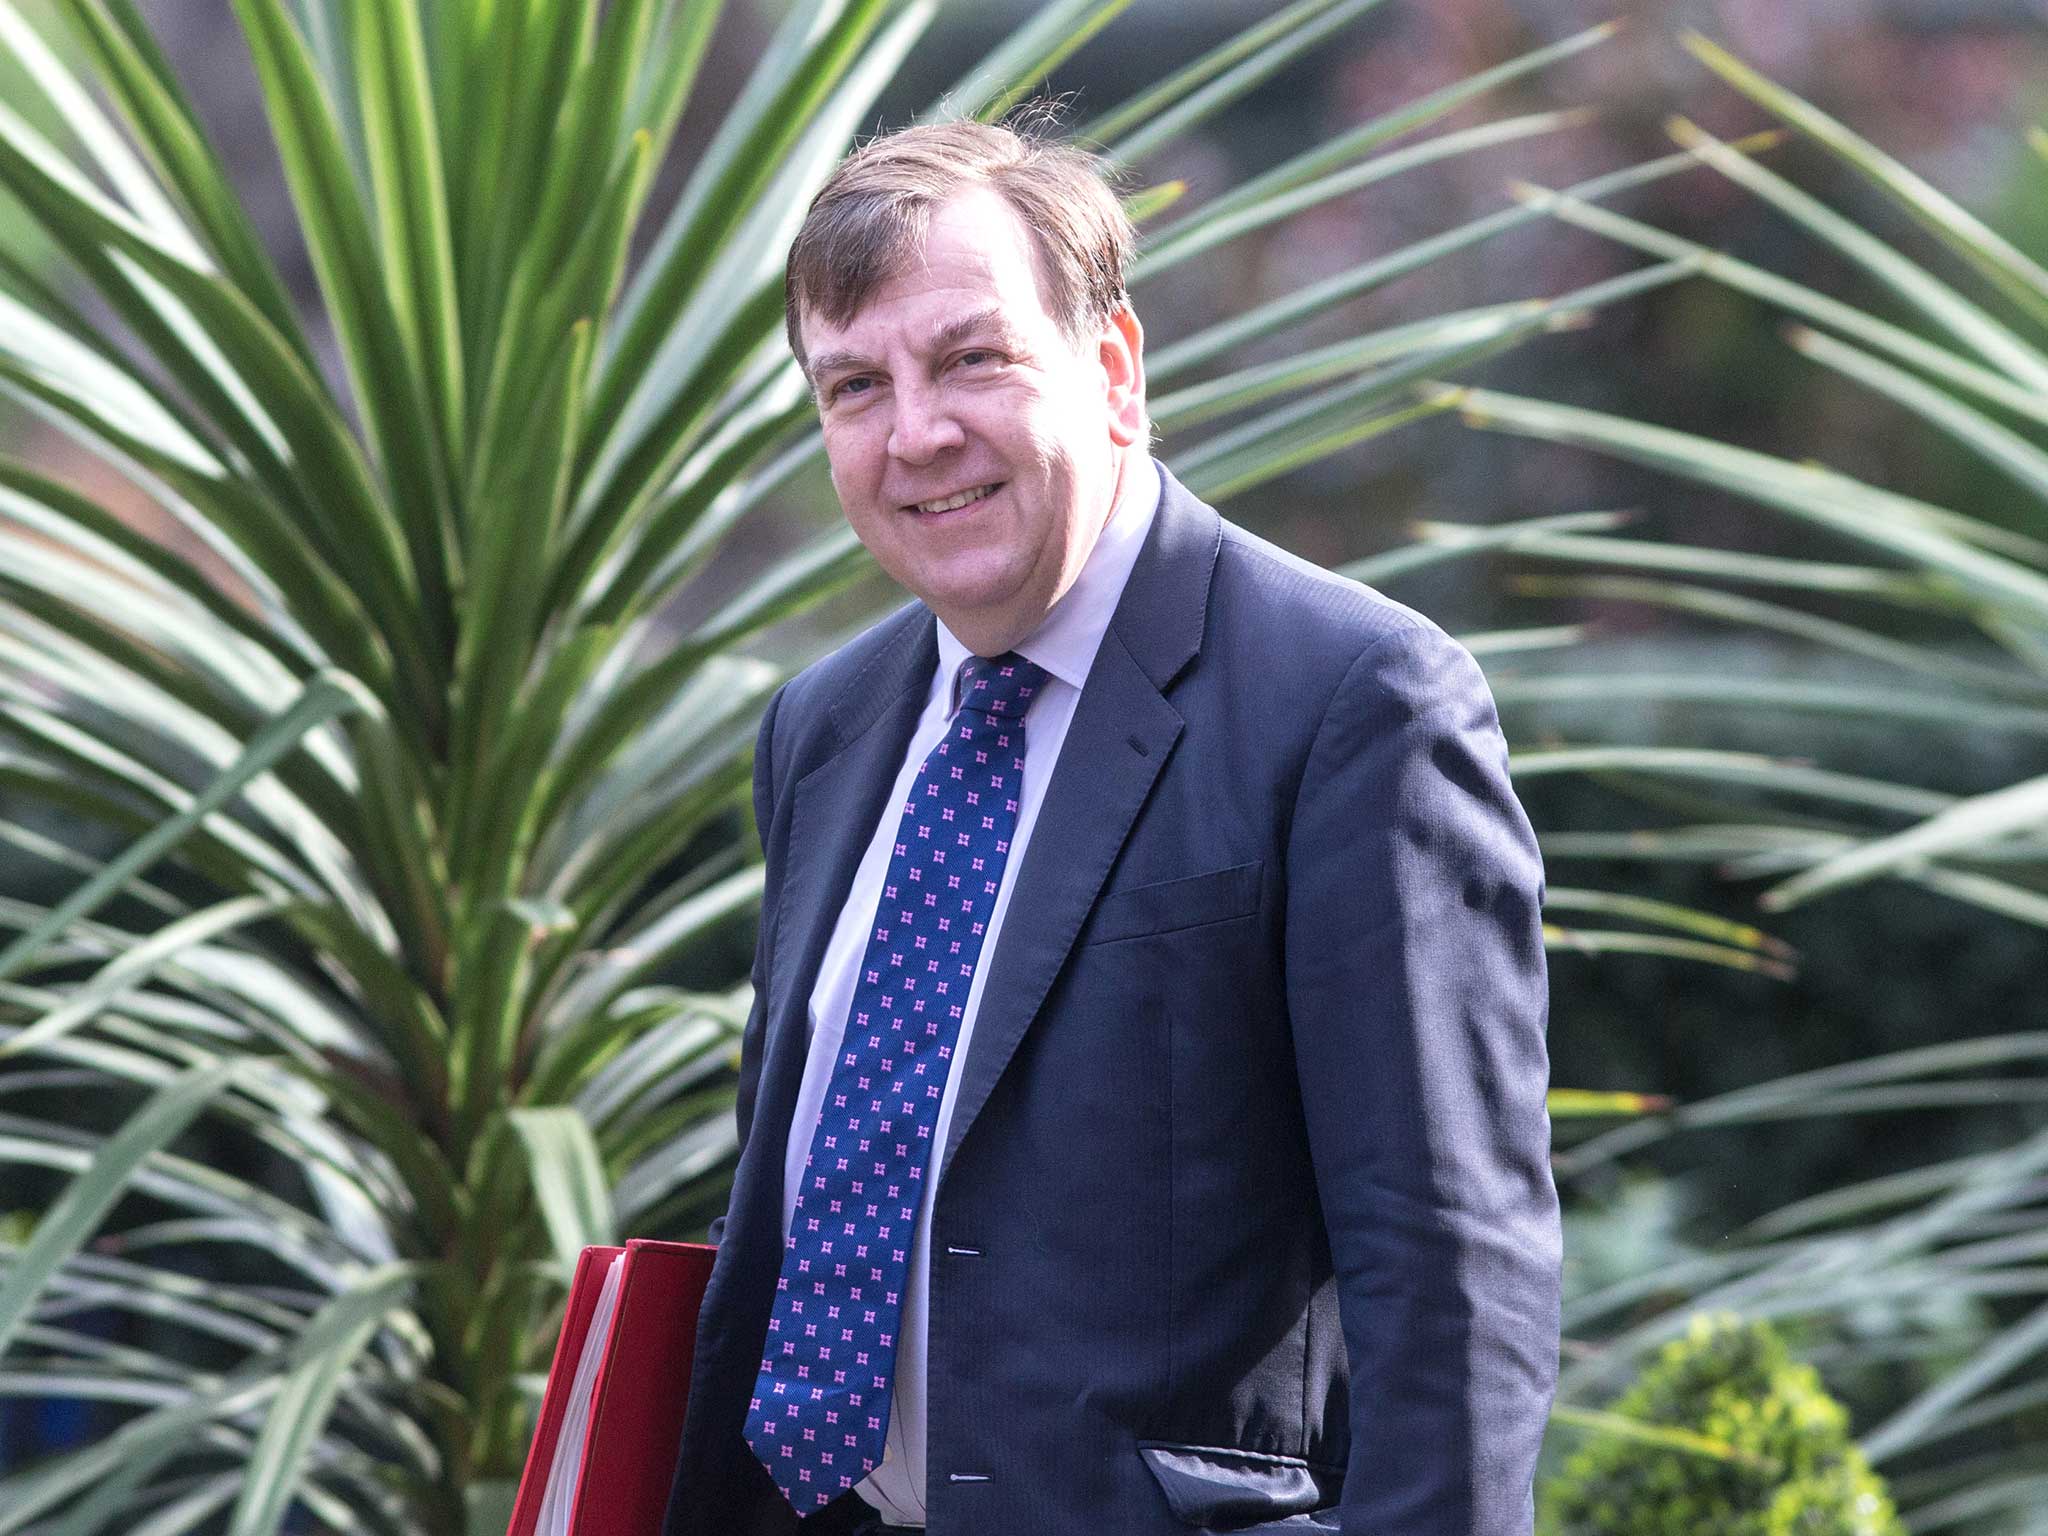 John Whittingdale's relationships have raised questions about David Cameron's judgement